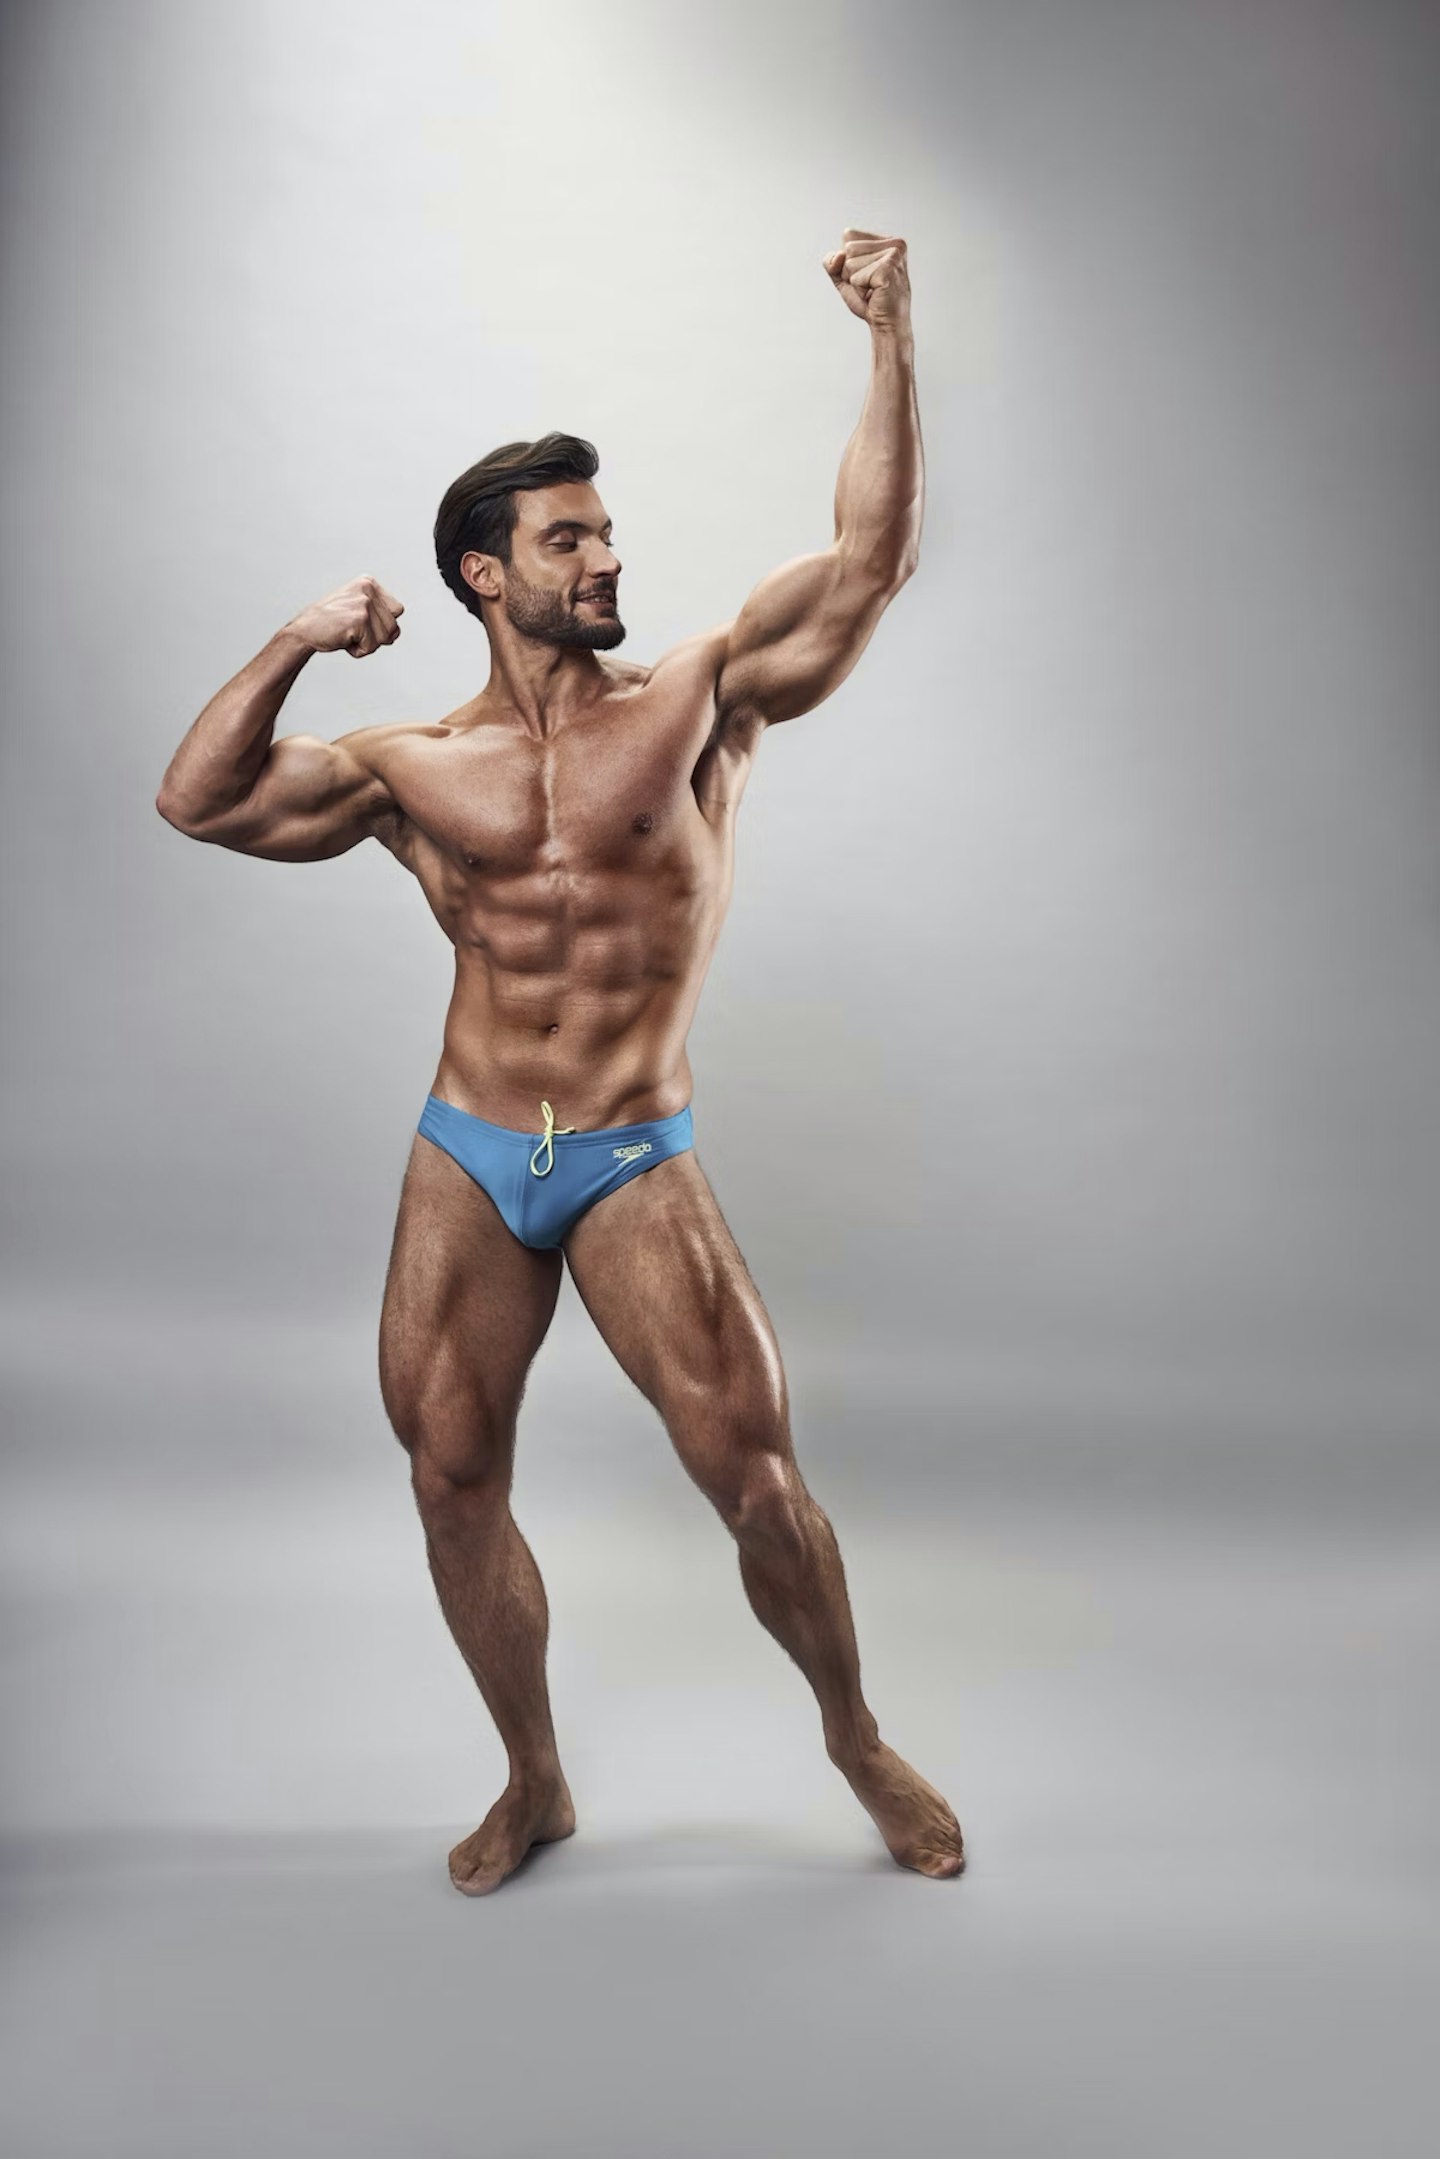 Davide poses in tiny blue panst